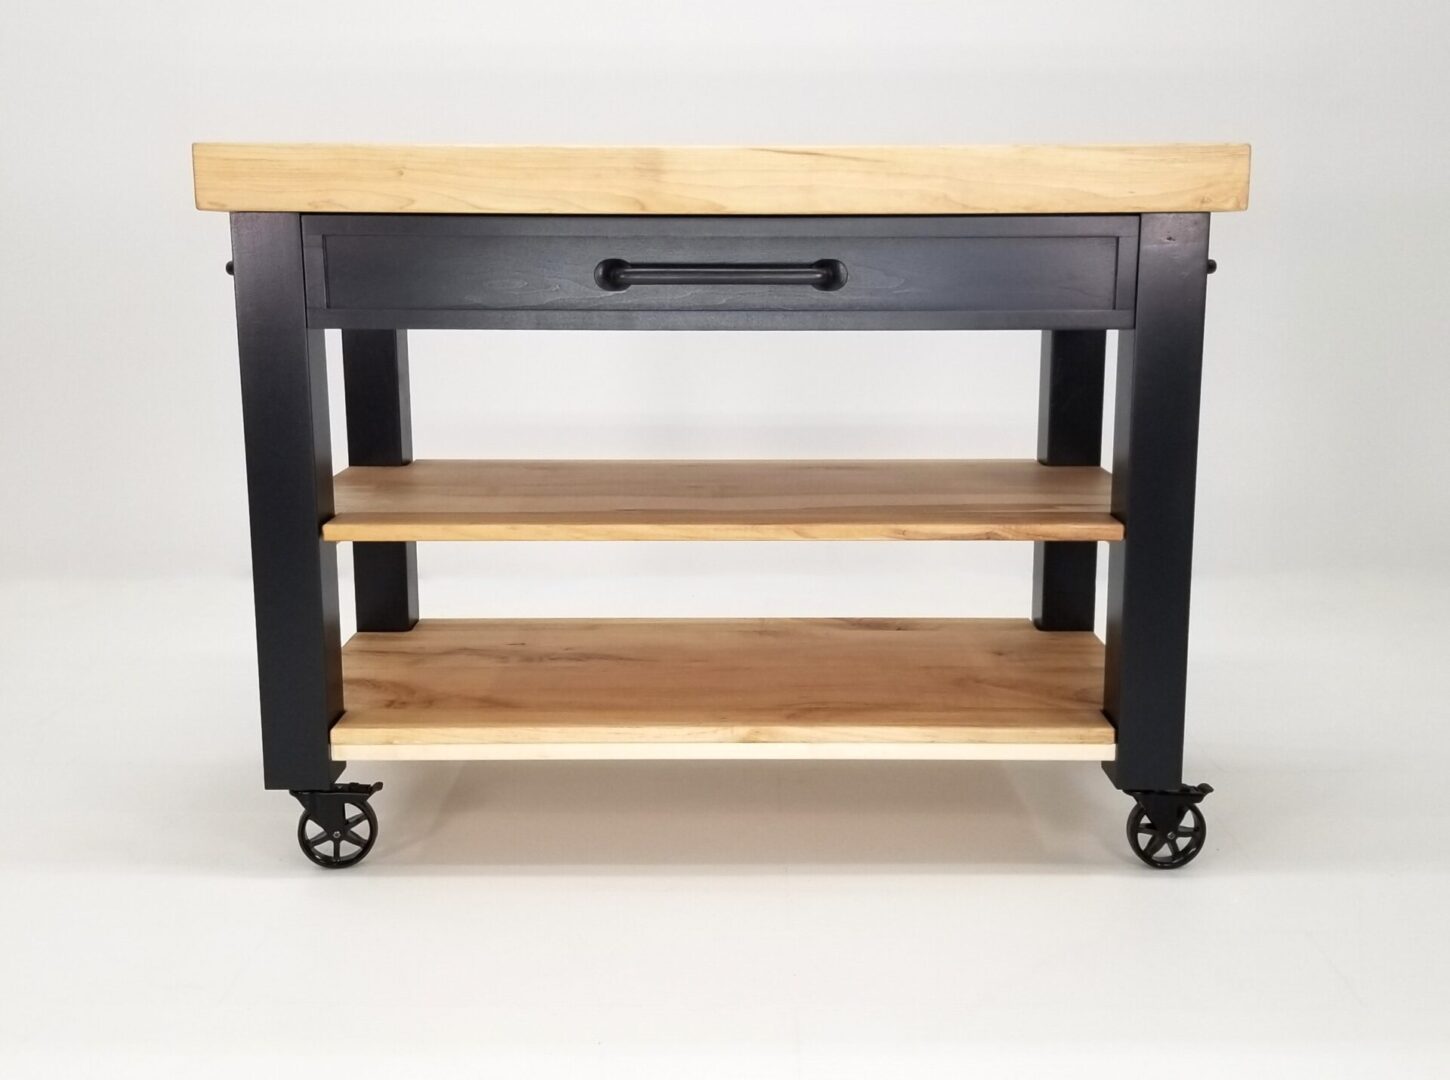 A wooden-top CHEF Custom Maple Butcher Block Cart on wheels, also known as a butcher block cart.